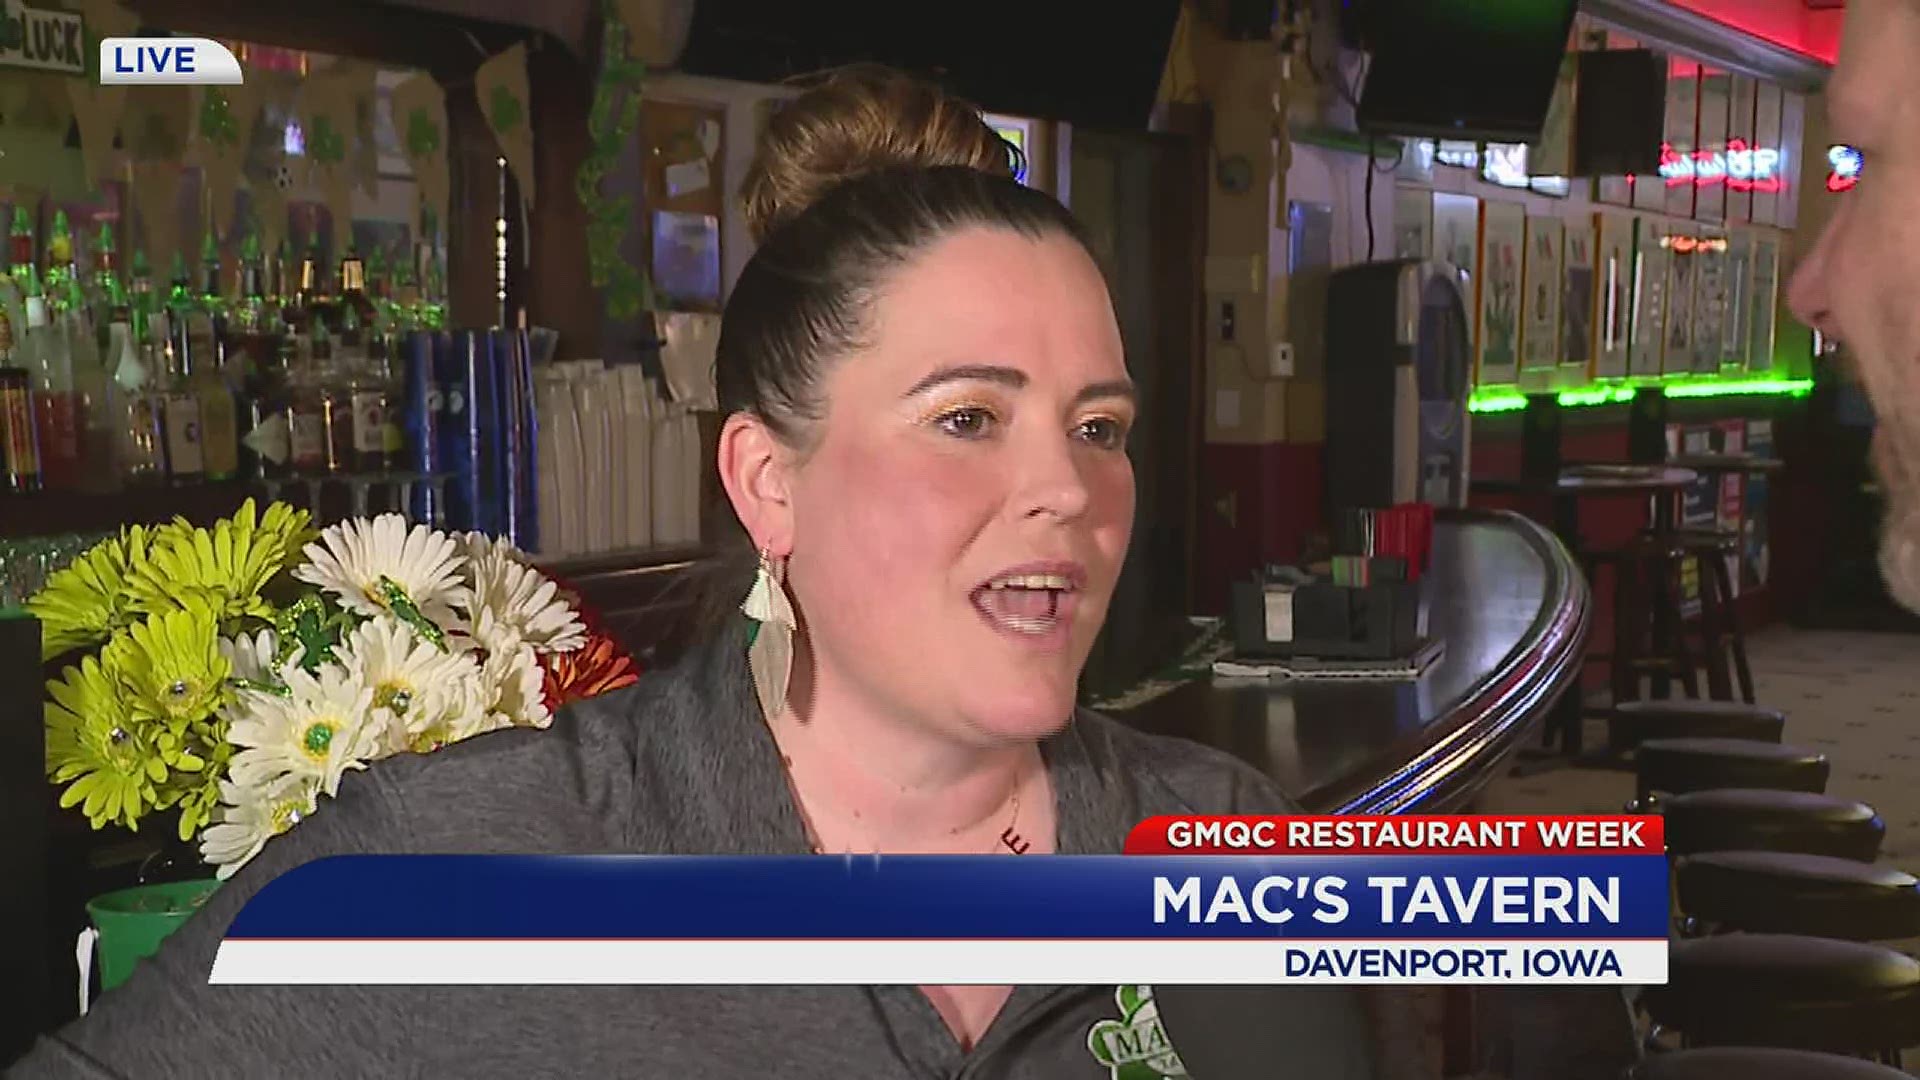 Eric Visits Mac's Tavern for Day 1 of Quad Cities Restaurant Week